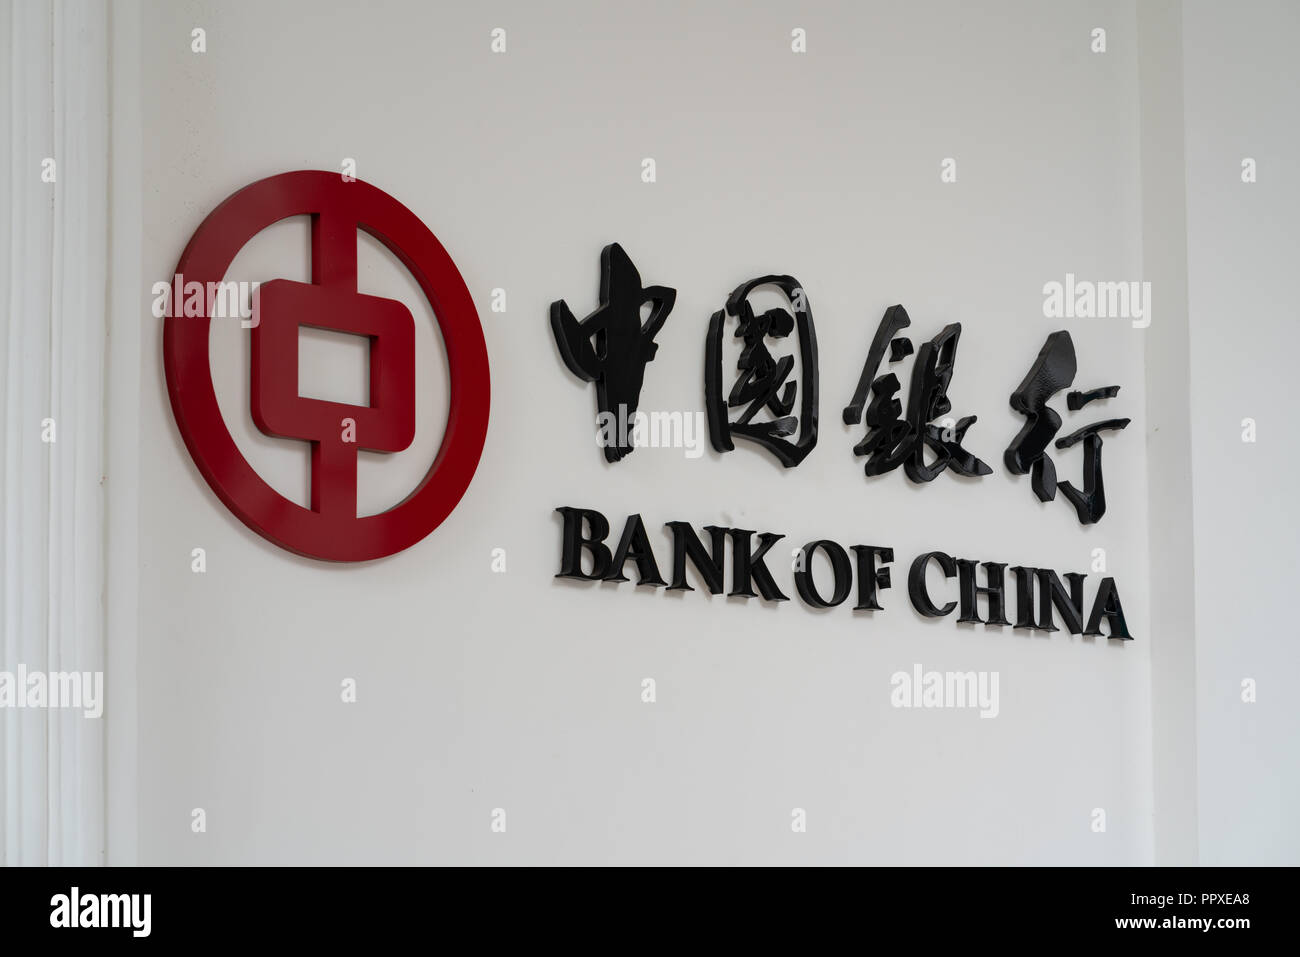 GEORGE TOWN, MALAYSIA - 15 SEPTEMBER, 2018: Bank of China logo signage on the white painted building located at George Town, Penang, Malaysia. Stock Photo